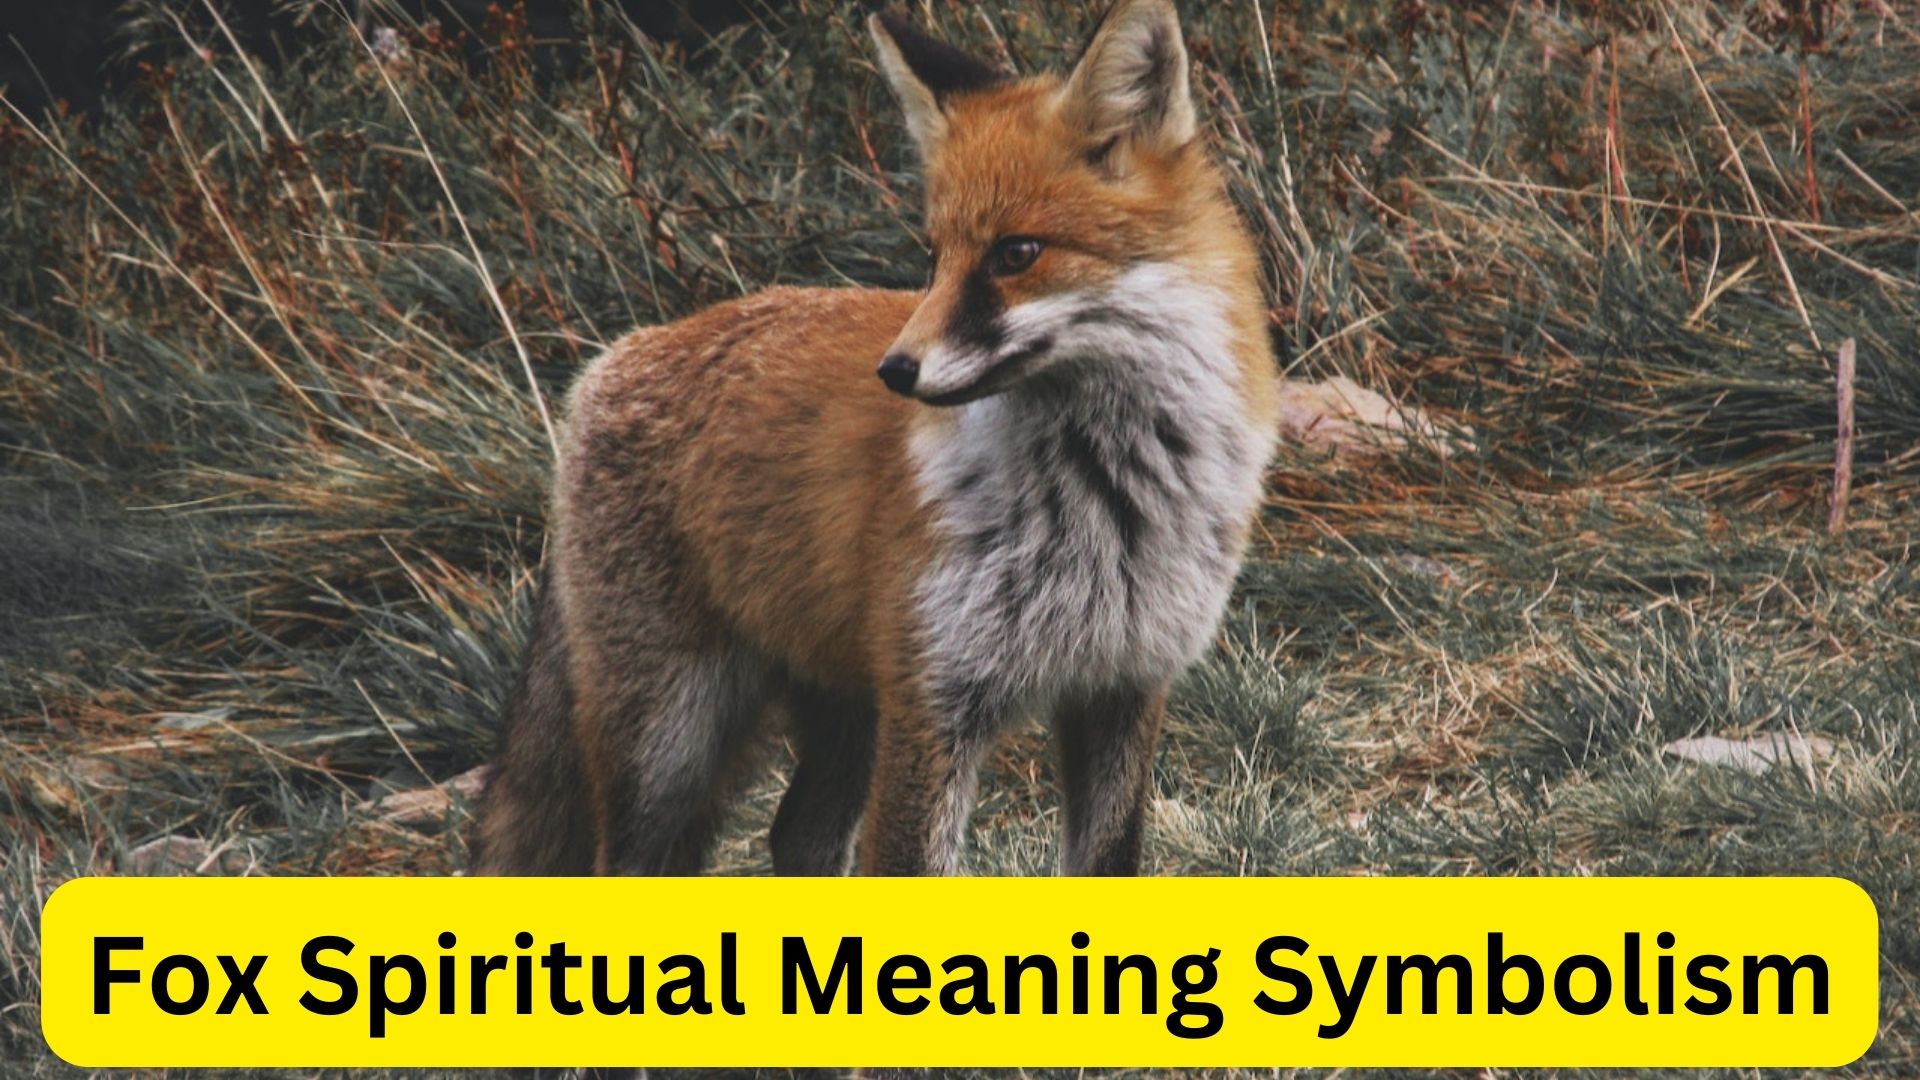 Fox Spiritual Meaning Symbolism - Represent Quiet Observation, Listening, Patience